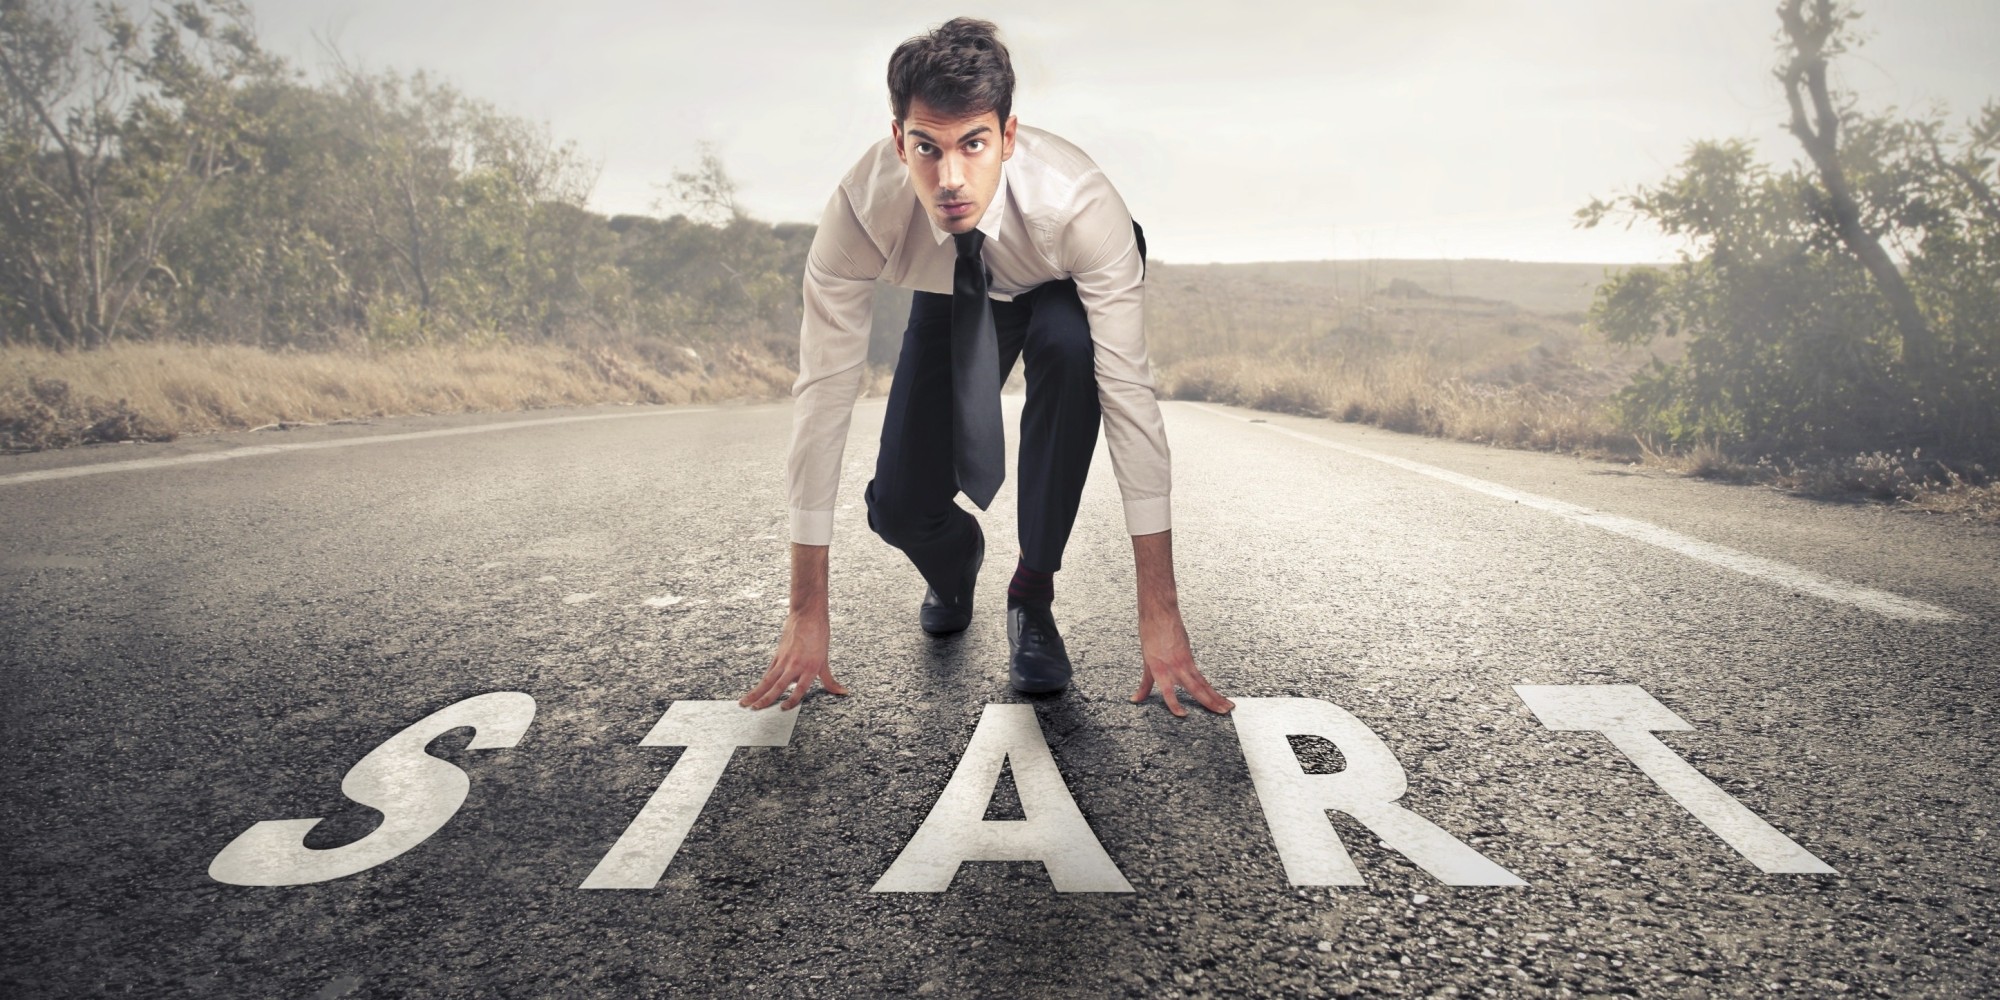 8-simple-steps-to-starting-your-business-in-2015-huffpost